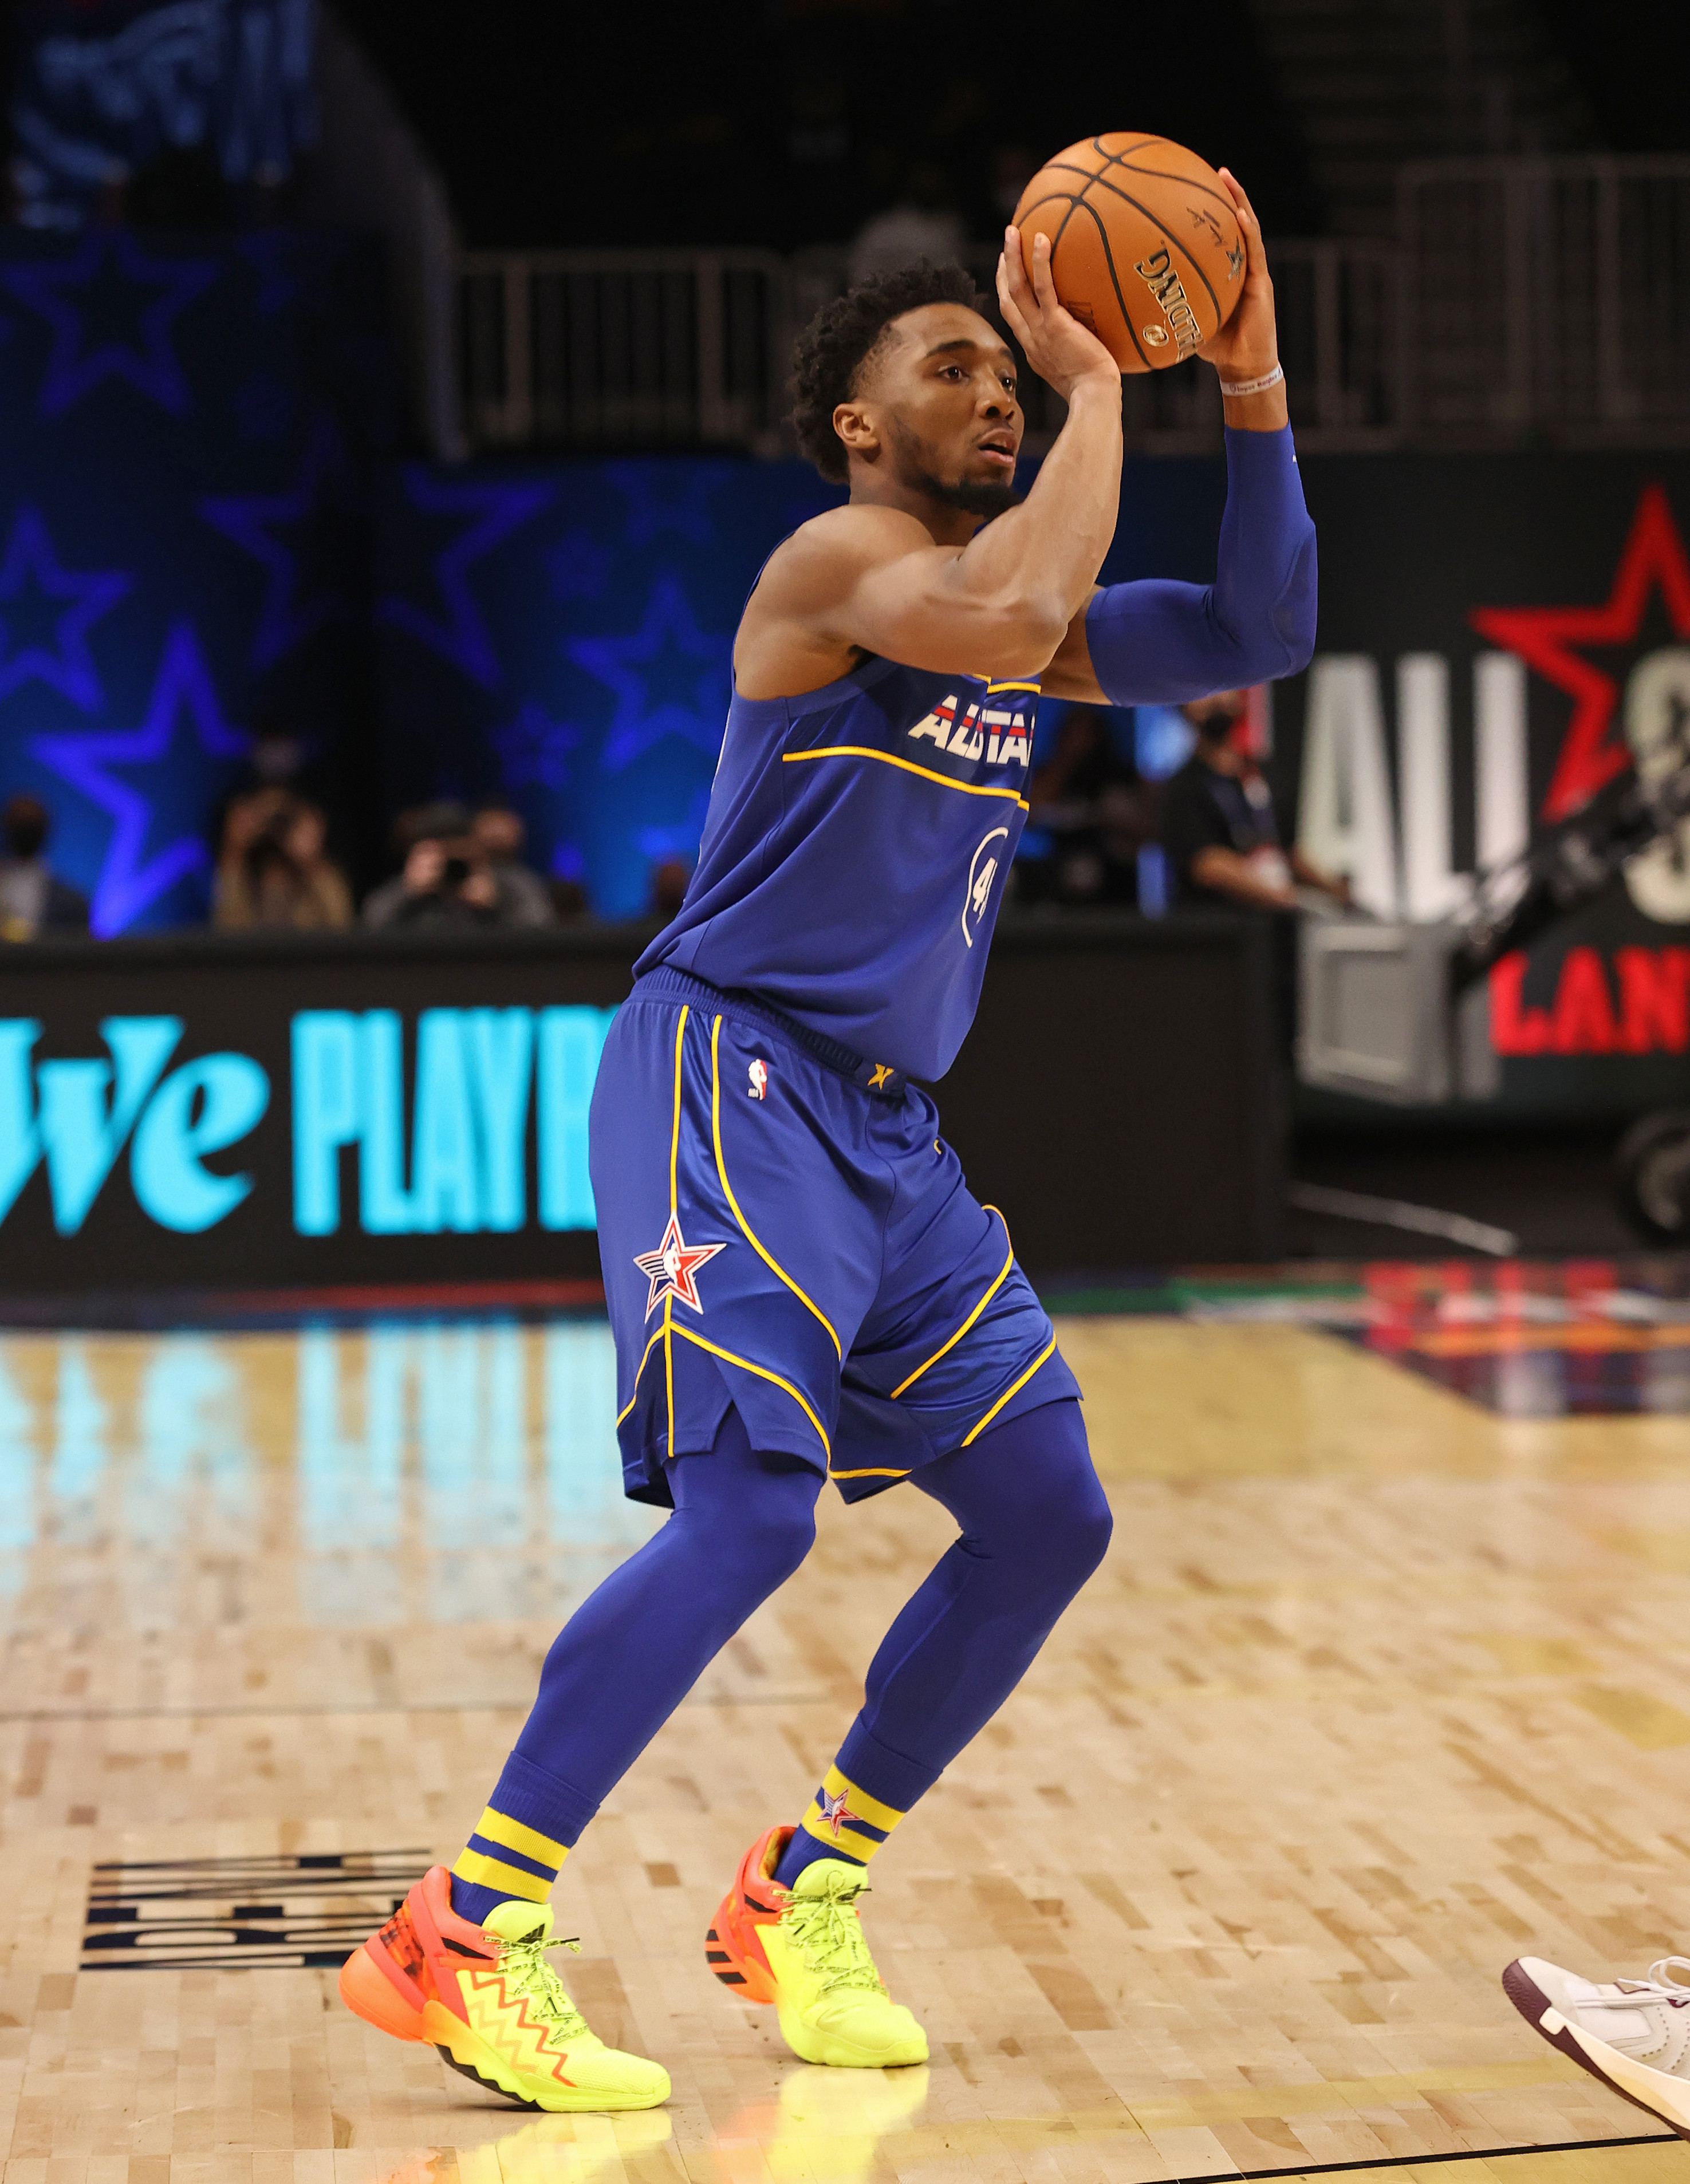 Every Sneaker Worn in the 2021 NBA All-Star Game